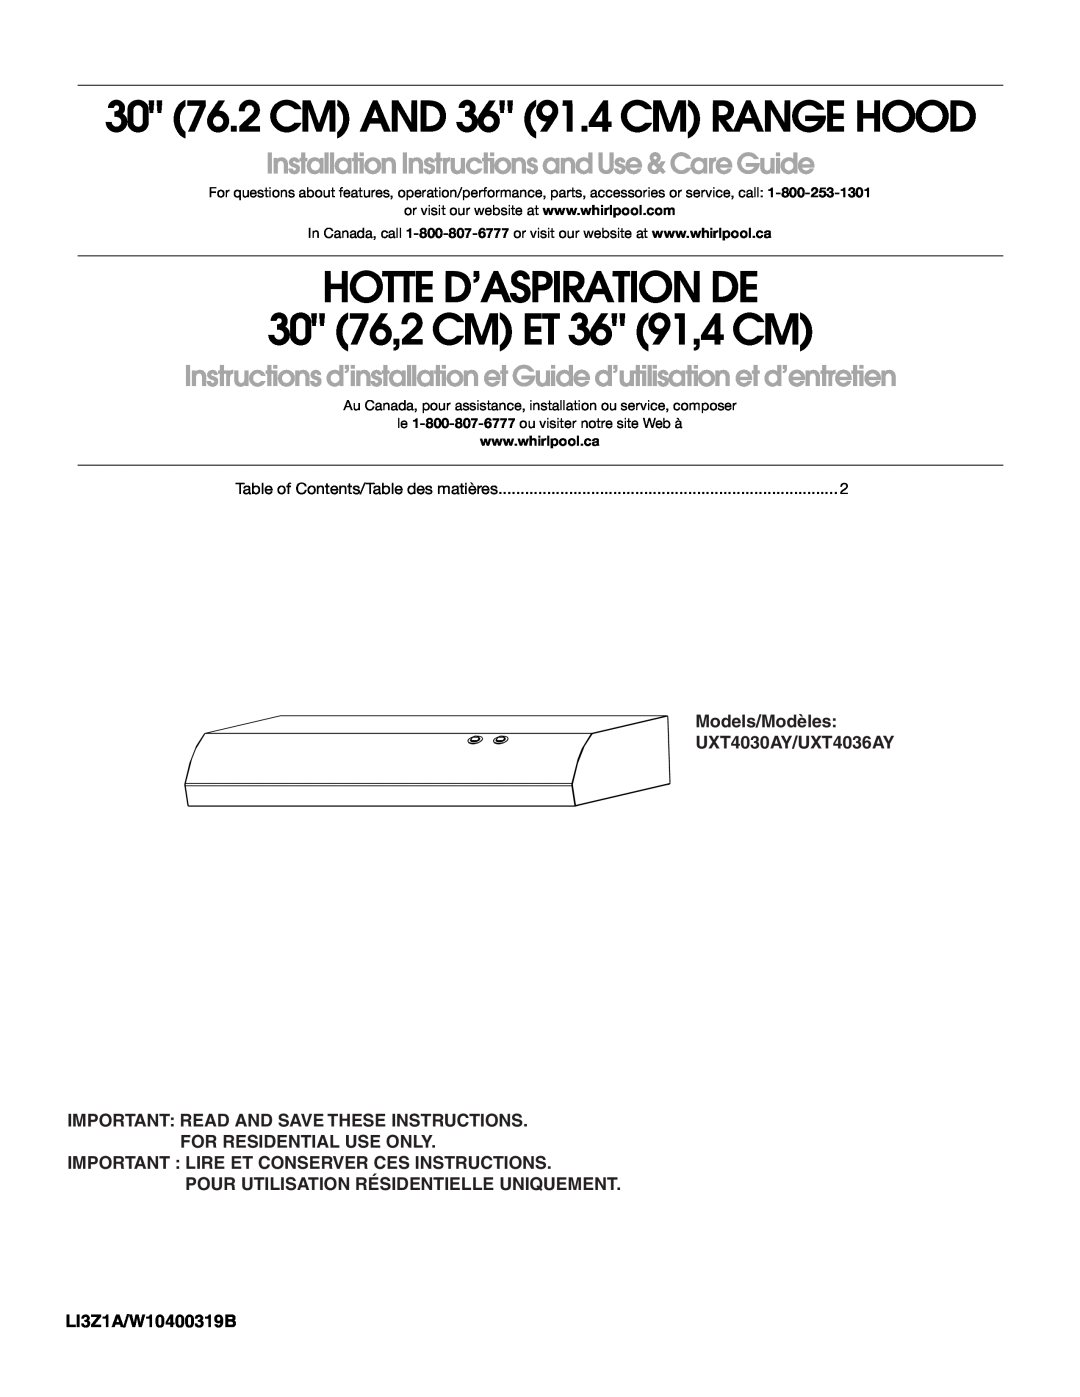 Whirlpool installation instructions Models/Modèles UXT4030AY/UXT4036AY, Important Read And Save These Instructions 